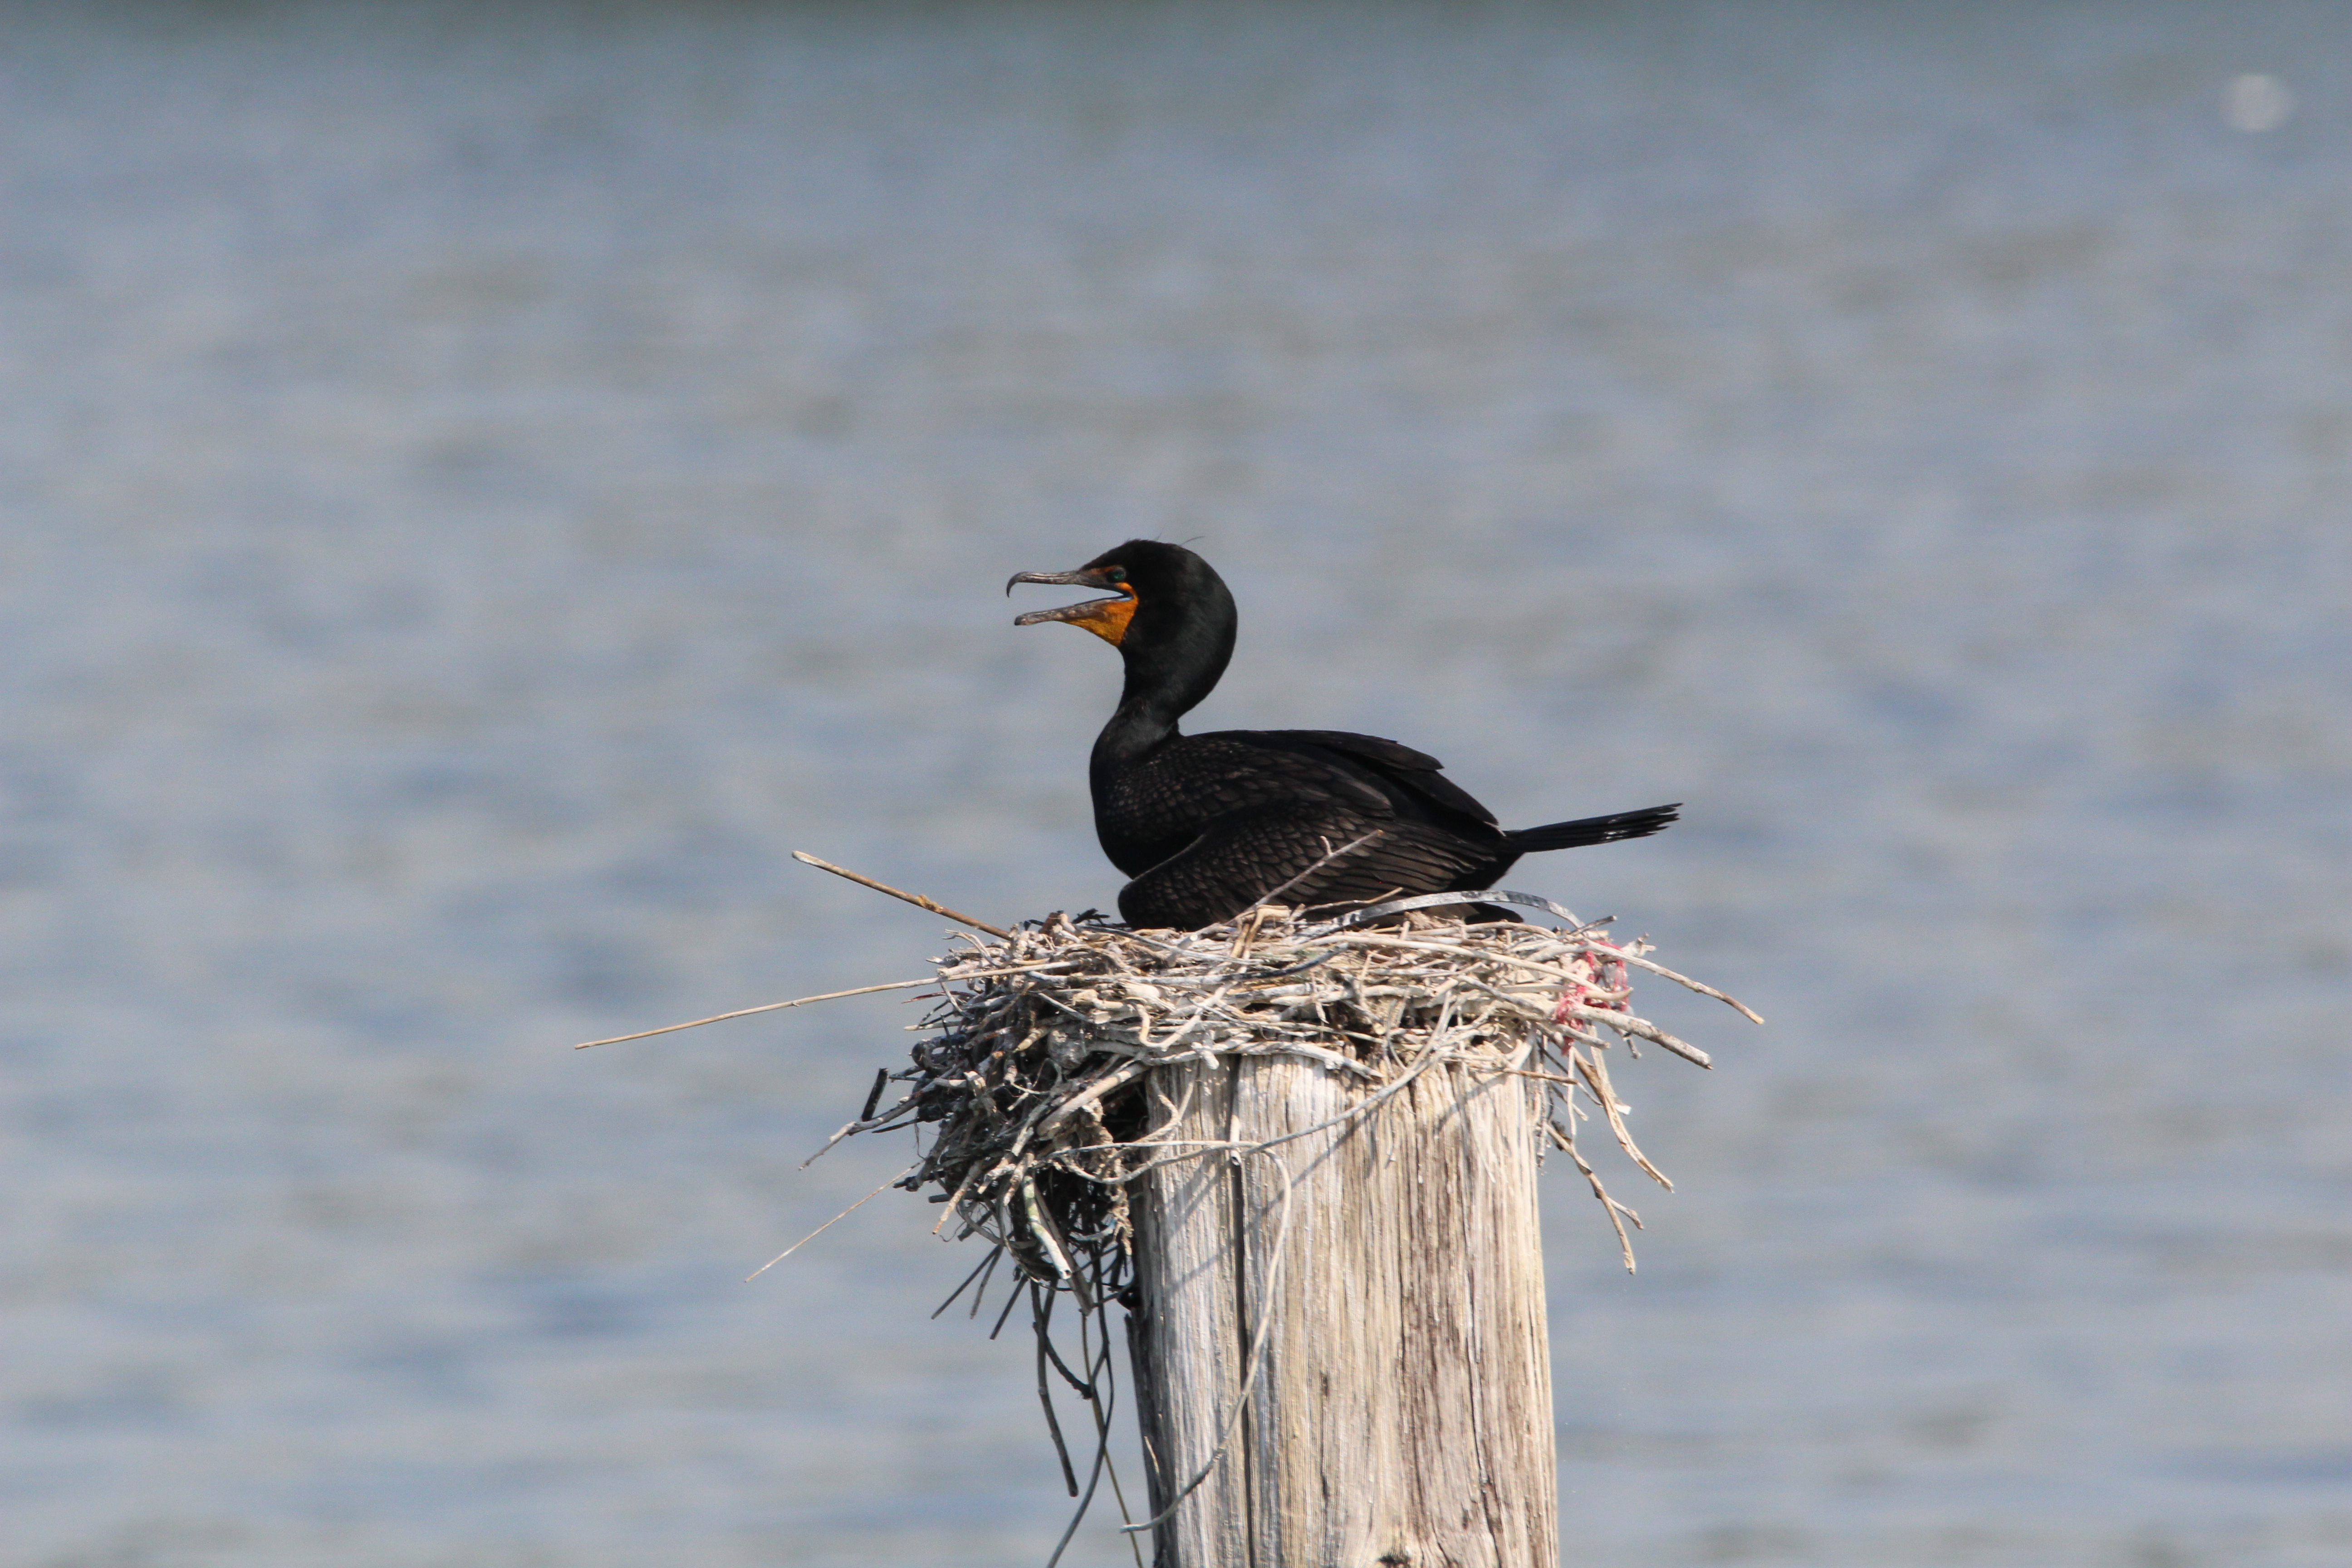 Double-crested Cormorants nest on pilings near Heritage Park. Photo: <a href=\"https://www.flickr.com/photos/89780664@N05/\" target=\"_blank\">Dave Ostapiuk</a>